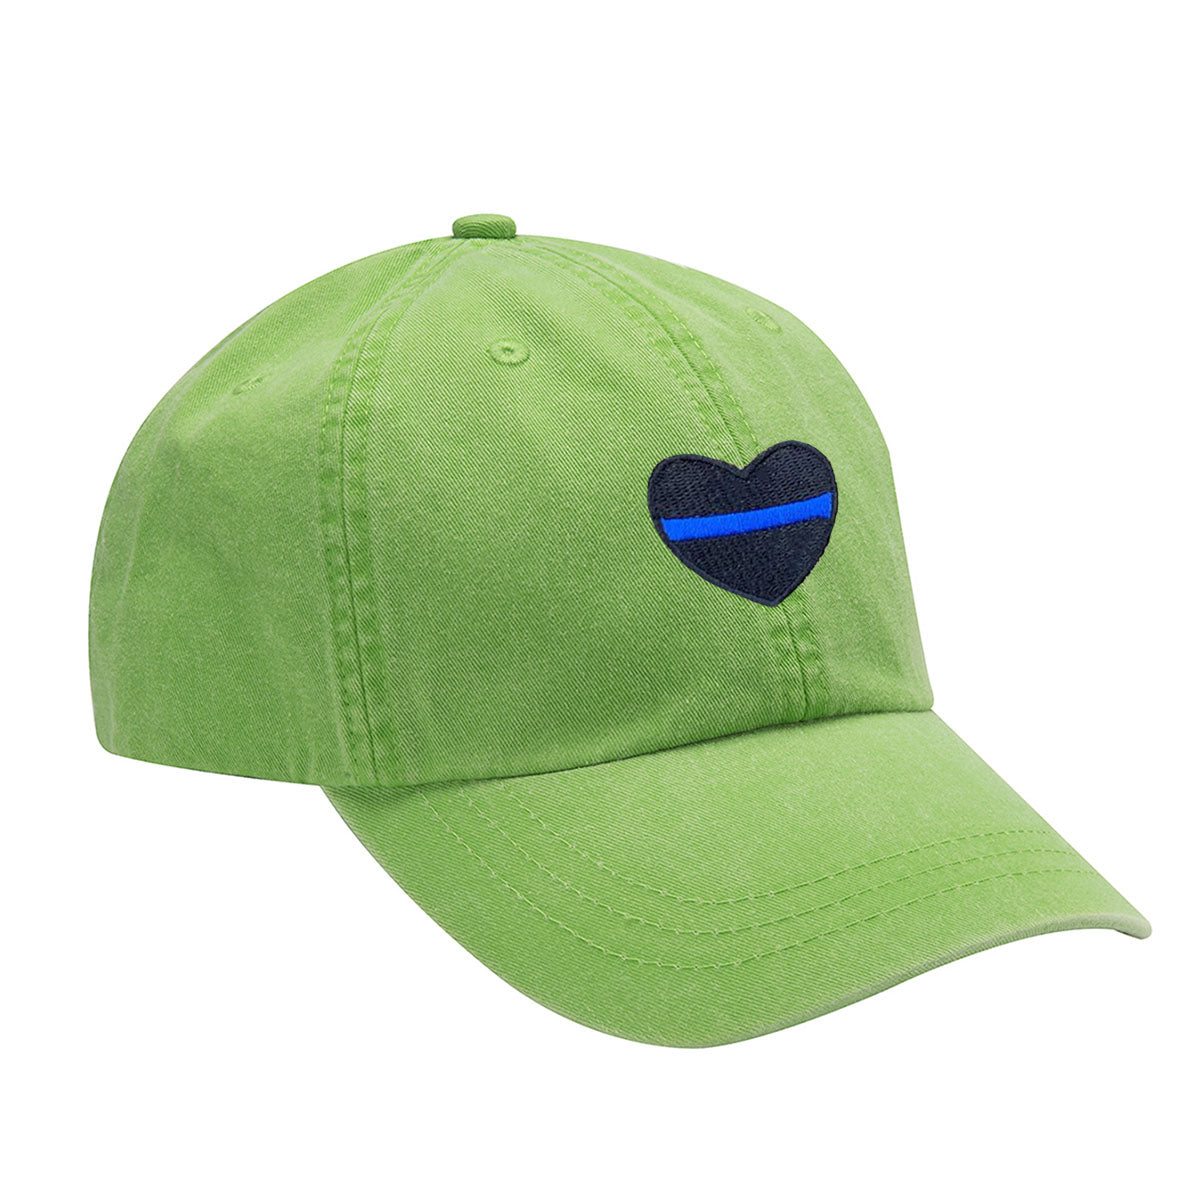 Thin Blue Line Heart Embroidered Baseball Cap